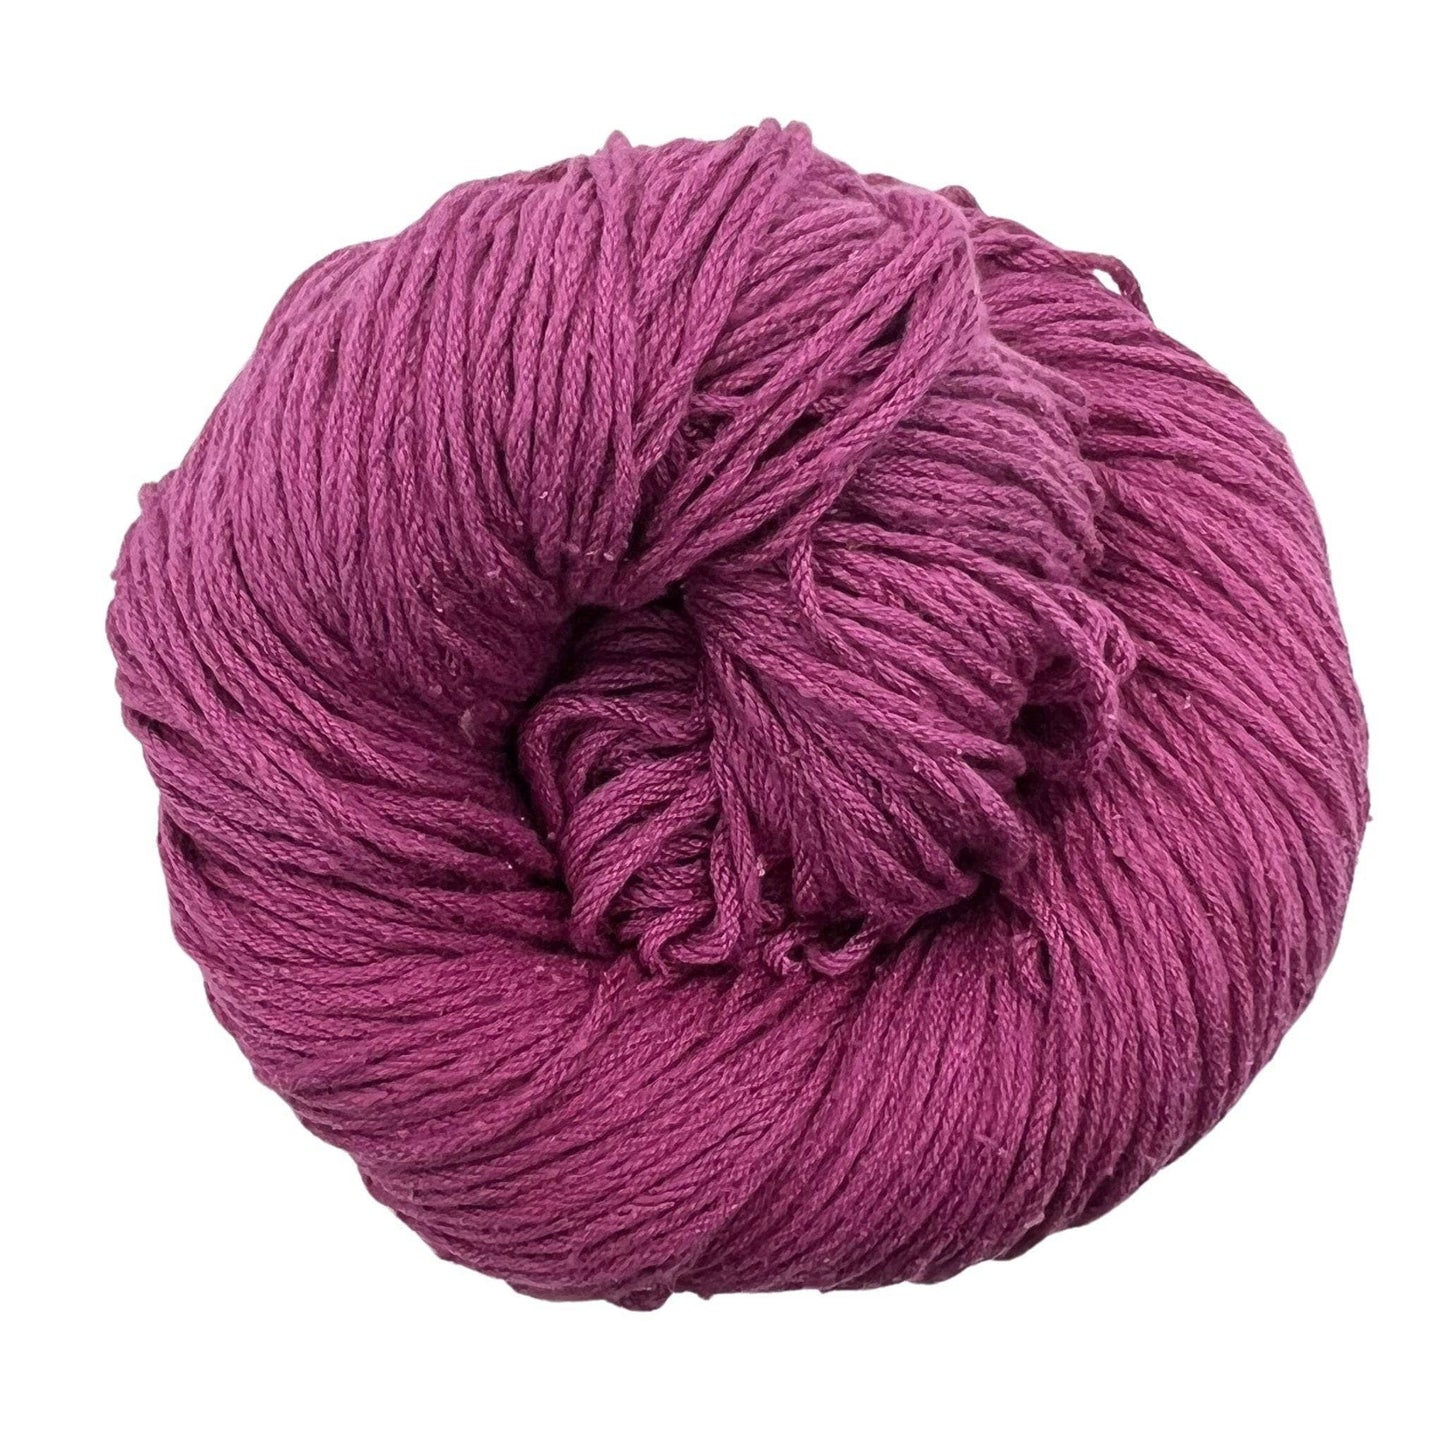 A skein of Mulberry silk fingering yarn in the colorway 'soft pink' on a white background.